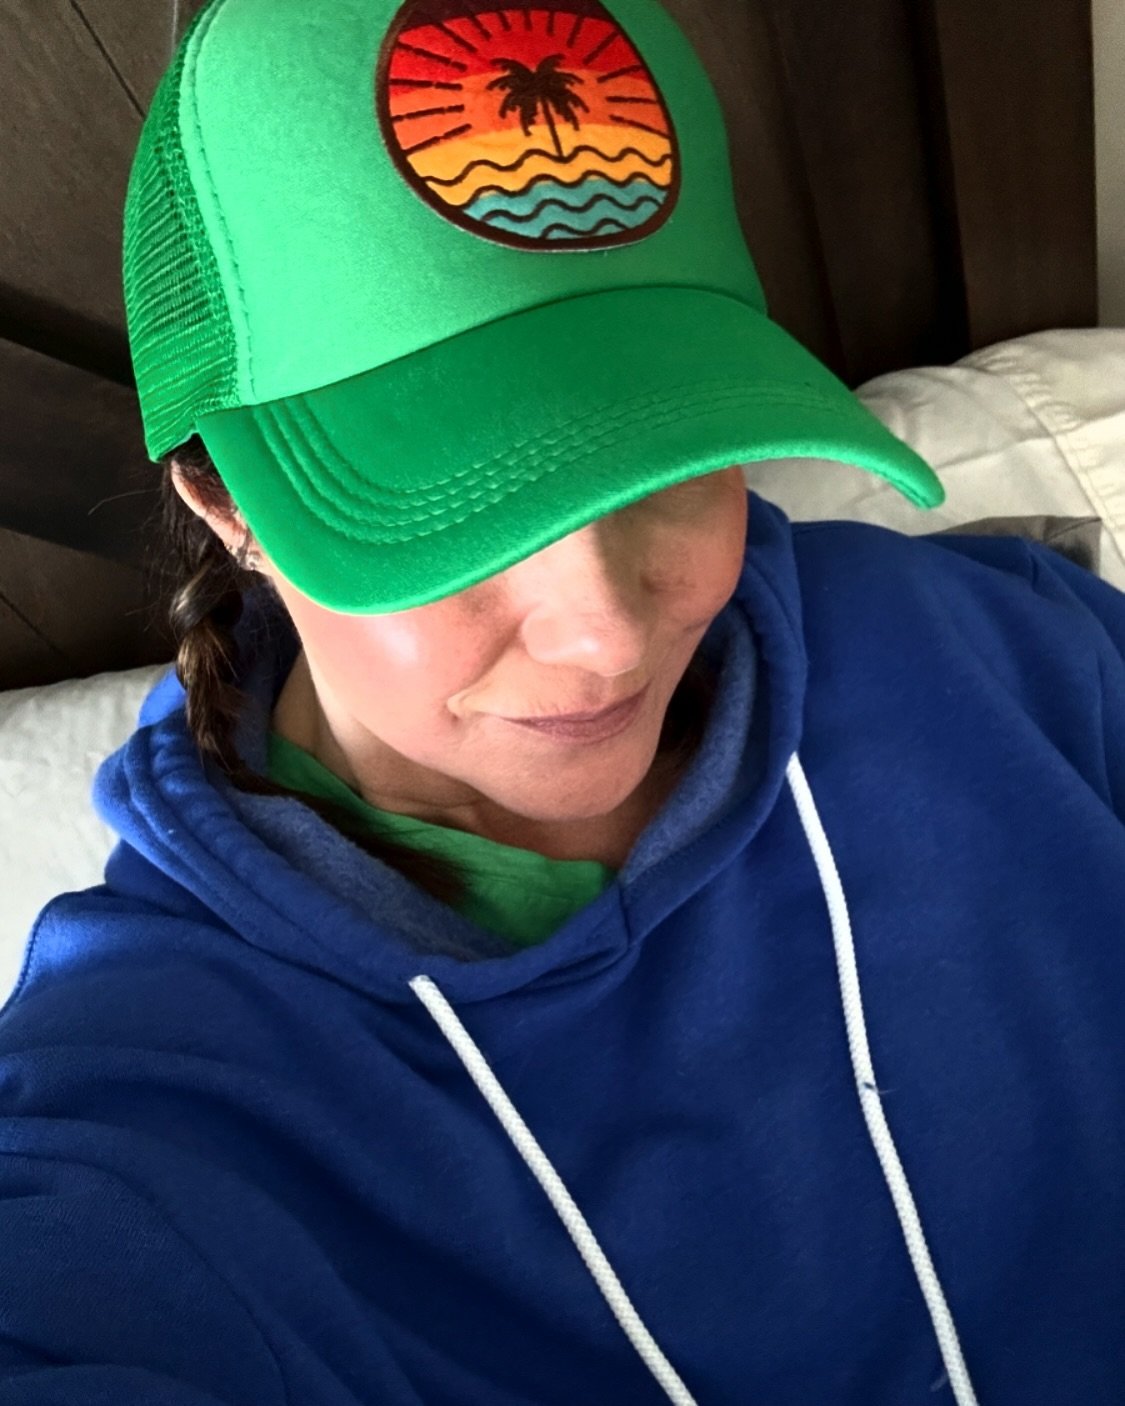 Loving this hat and hoodie combo! @matchingpatches and @gianthoodies made a match! 

#hatbar #customhats #truckerhatbarexperience #truckerhatbar #minneapolis #mnmade #mnsmallbusiness #mnmom #mnfw #mneventplanner #mnevents #mnsmallbusinessowner #snapb